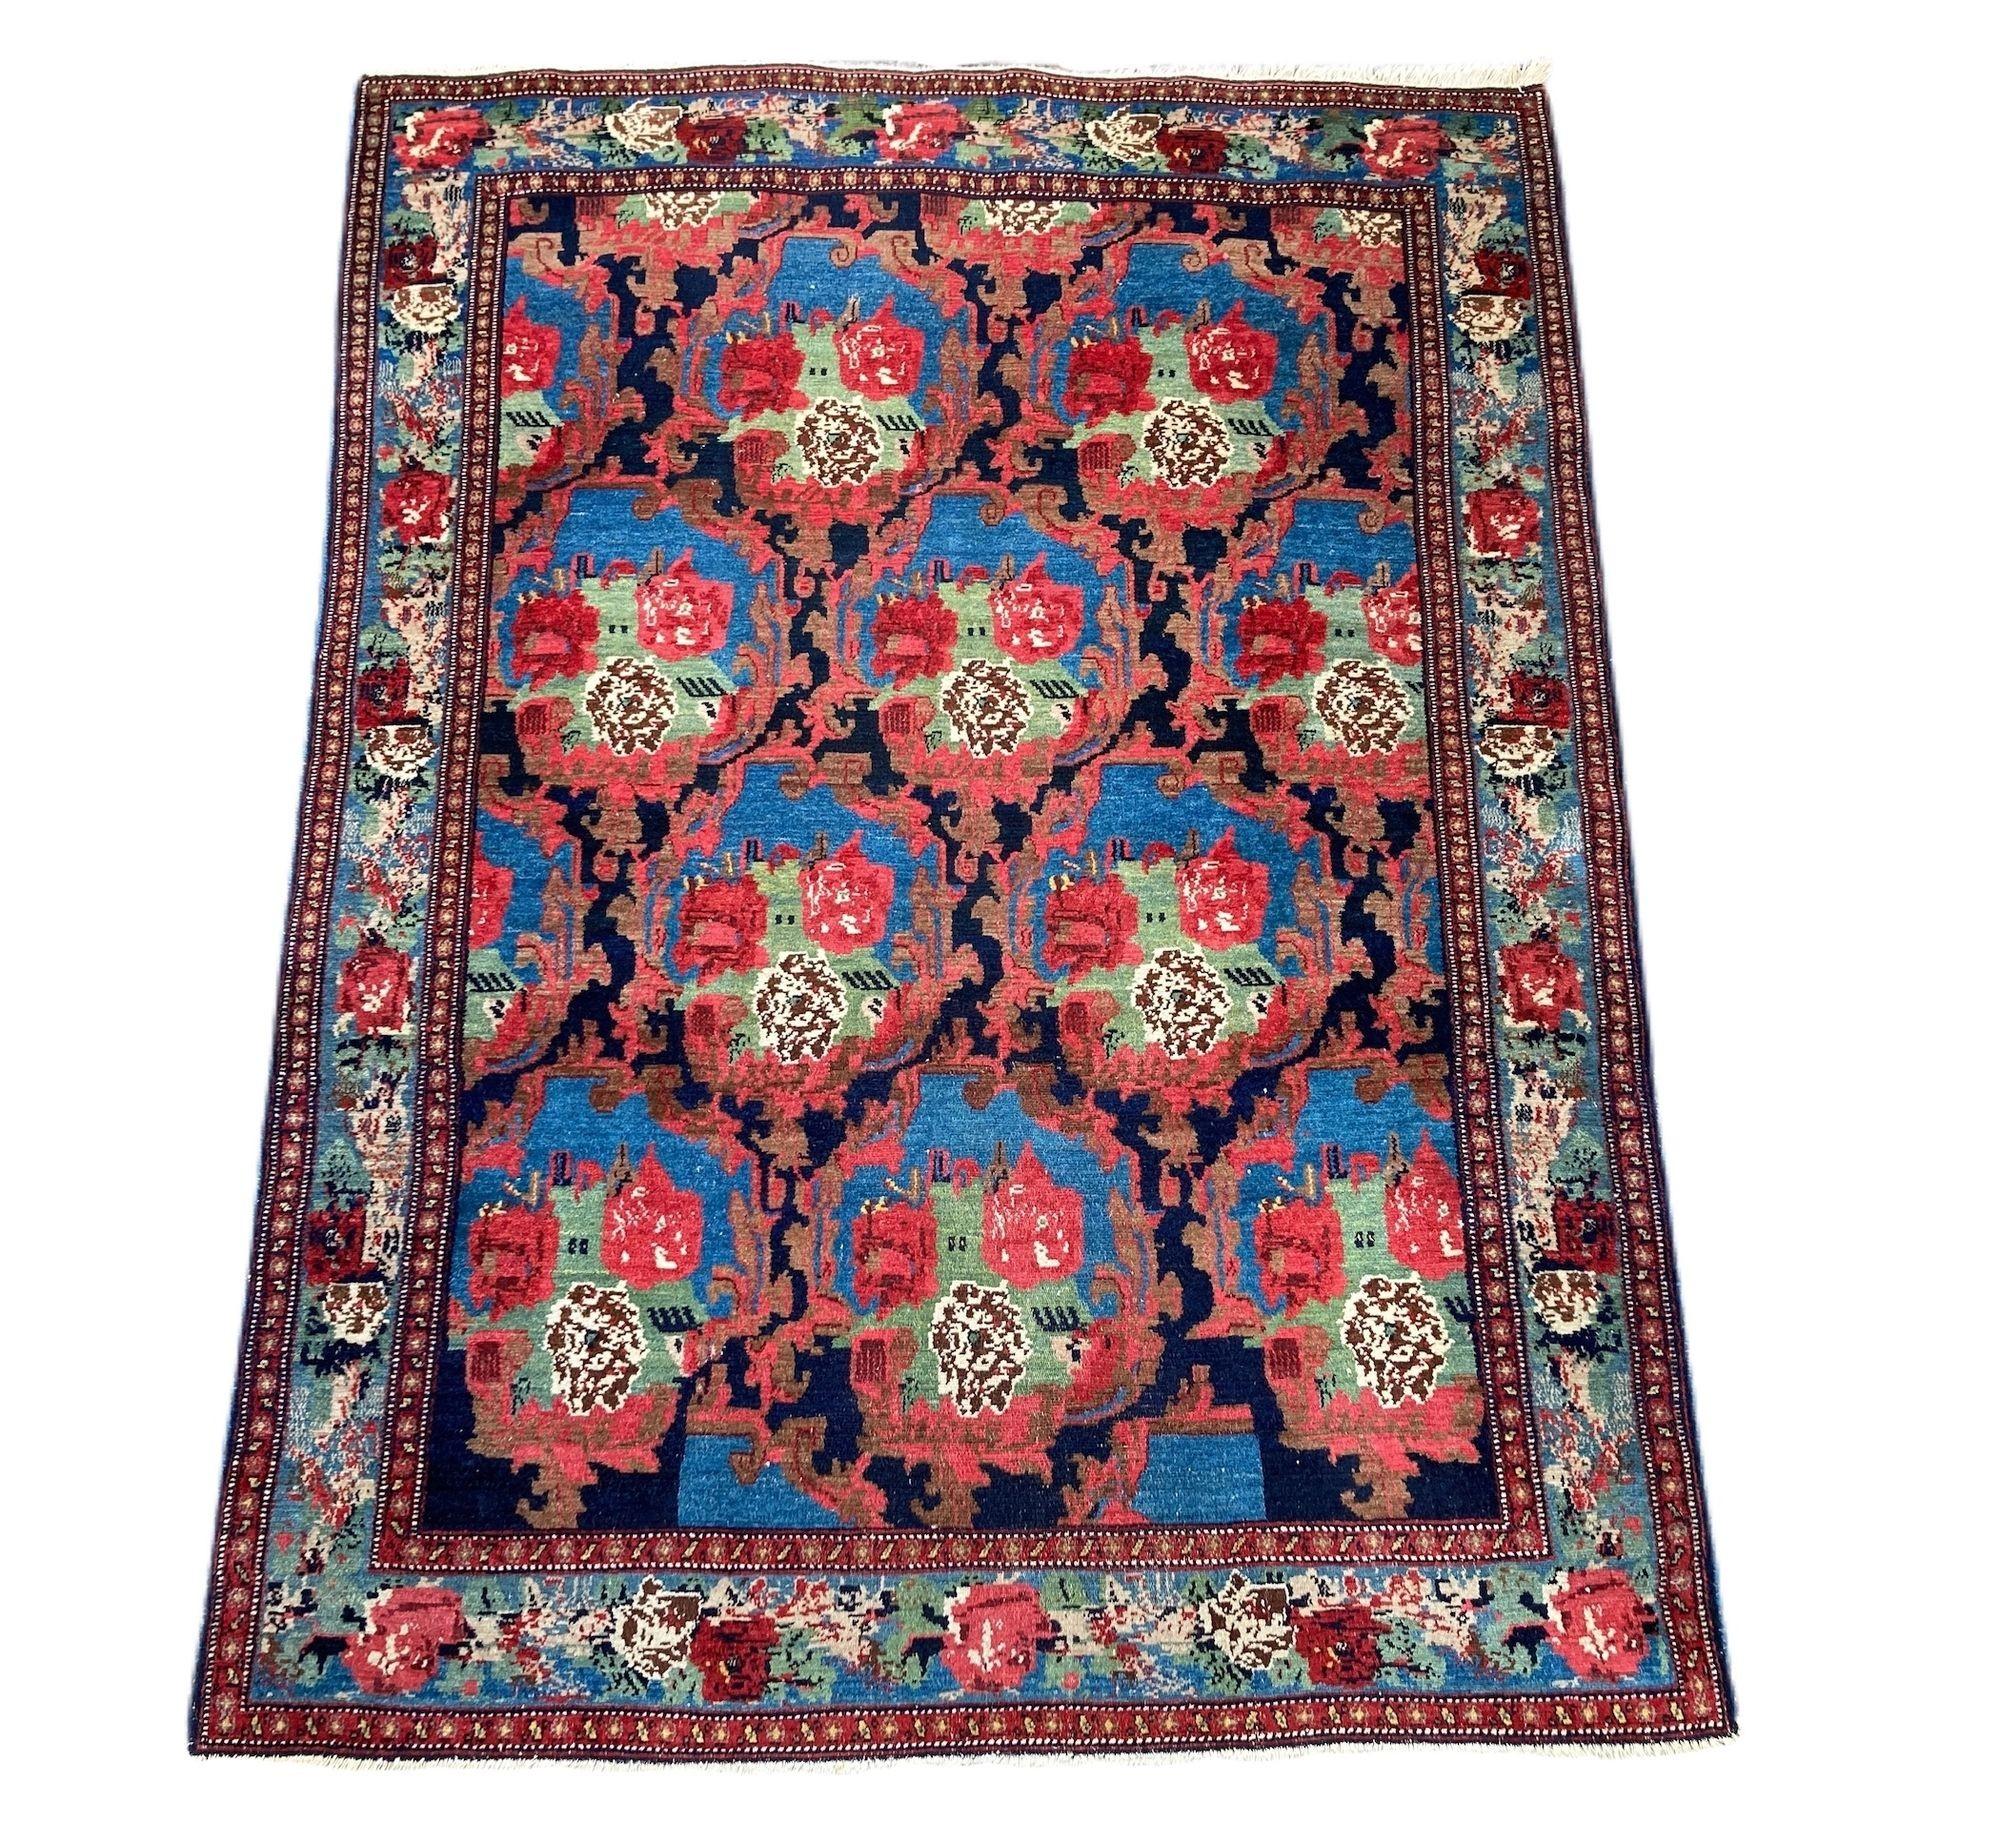 A lovely antique Senneh rug, hand woven circa 1900 featuring a Gol Farang (literally meaning ‘foreign flower’) design on a deep indigo field. Finely woven with great quality wool and wonderful colours of blues, greens and reds.
Size: 1.82m x 1.38m